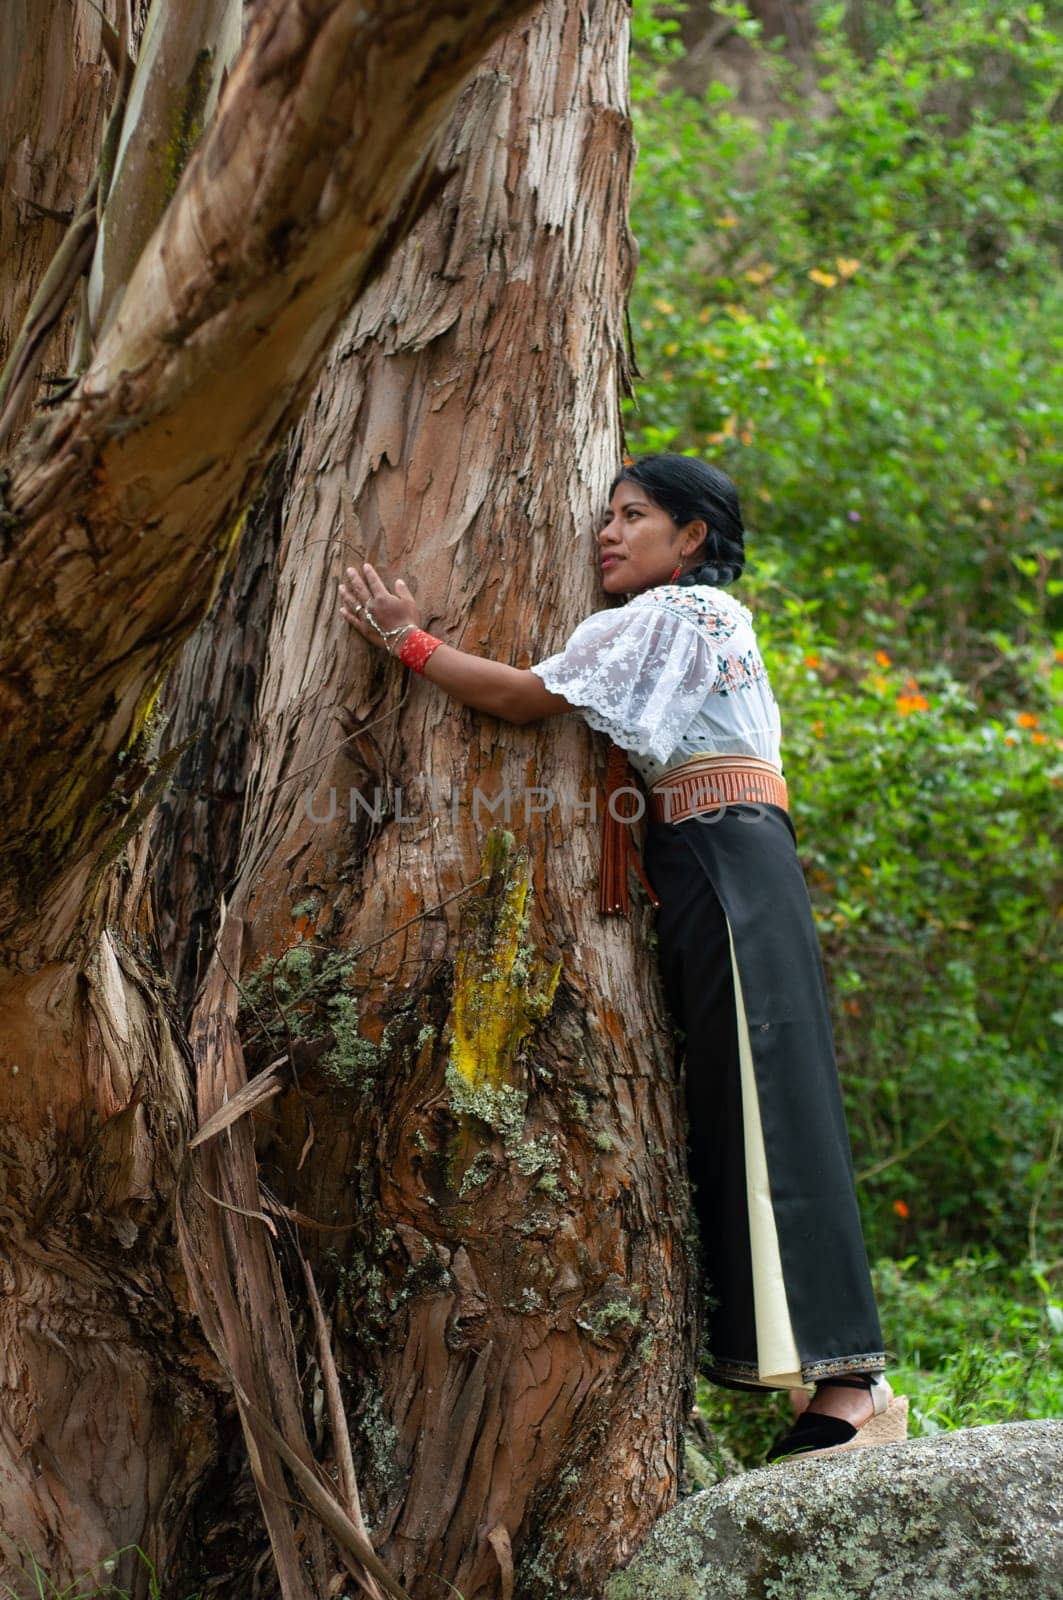 indigenous environmentalist embracing an ancient tree in a moment of spiritual connection and vitality. High quality photo